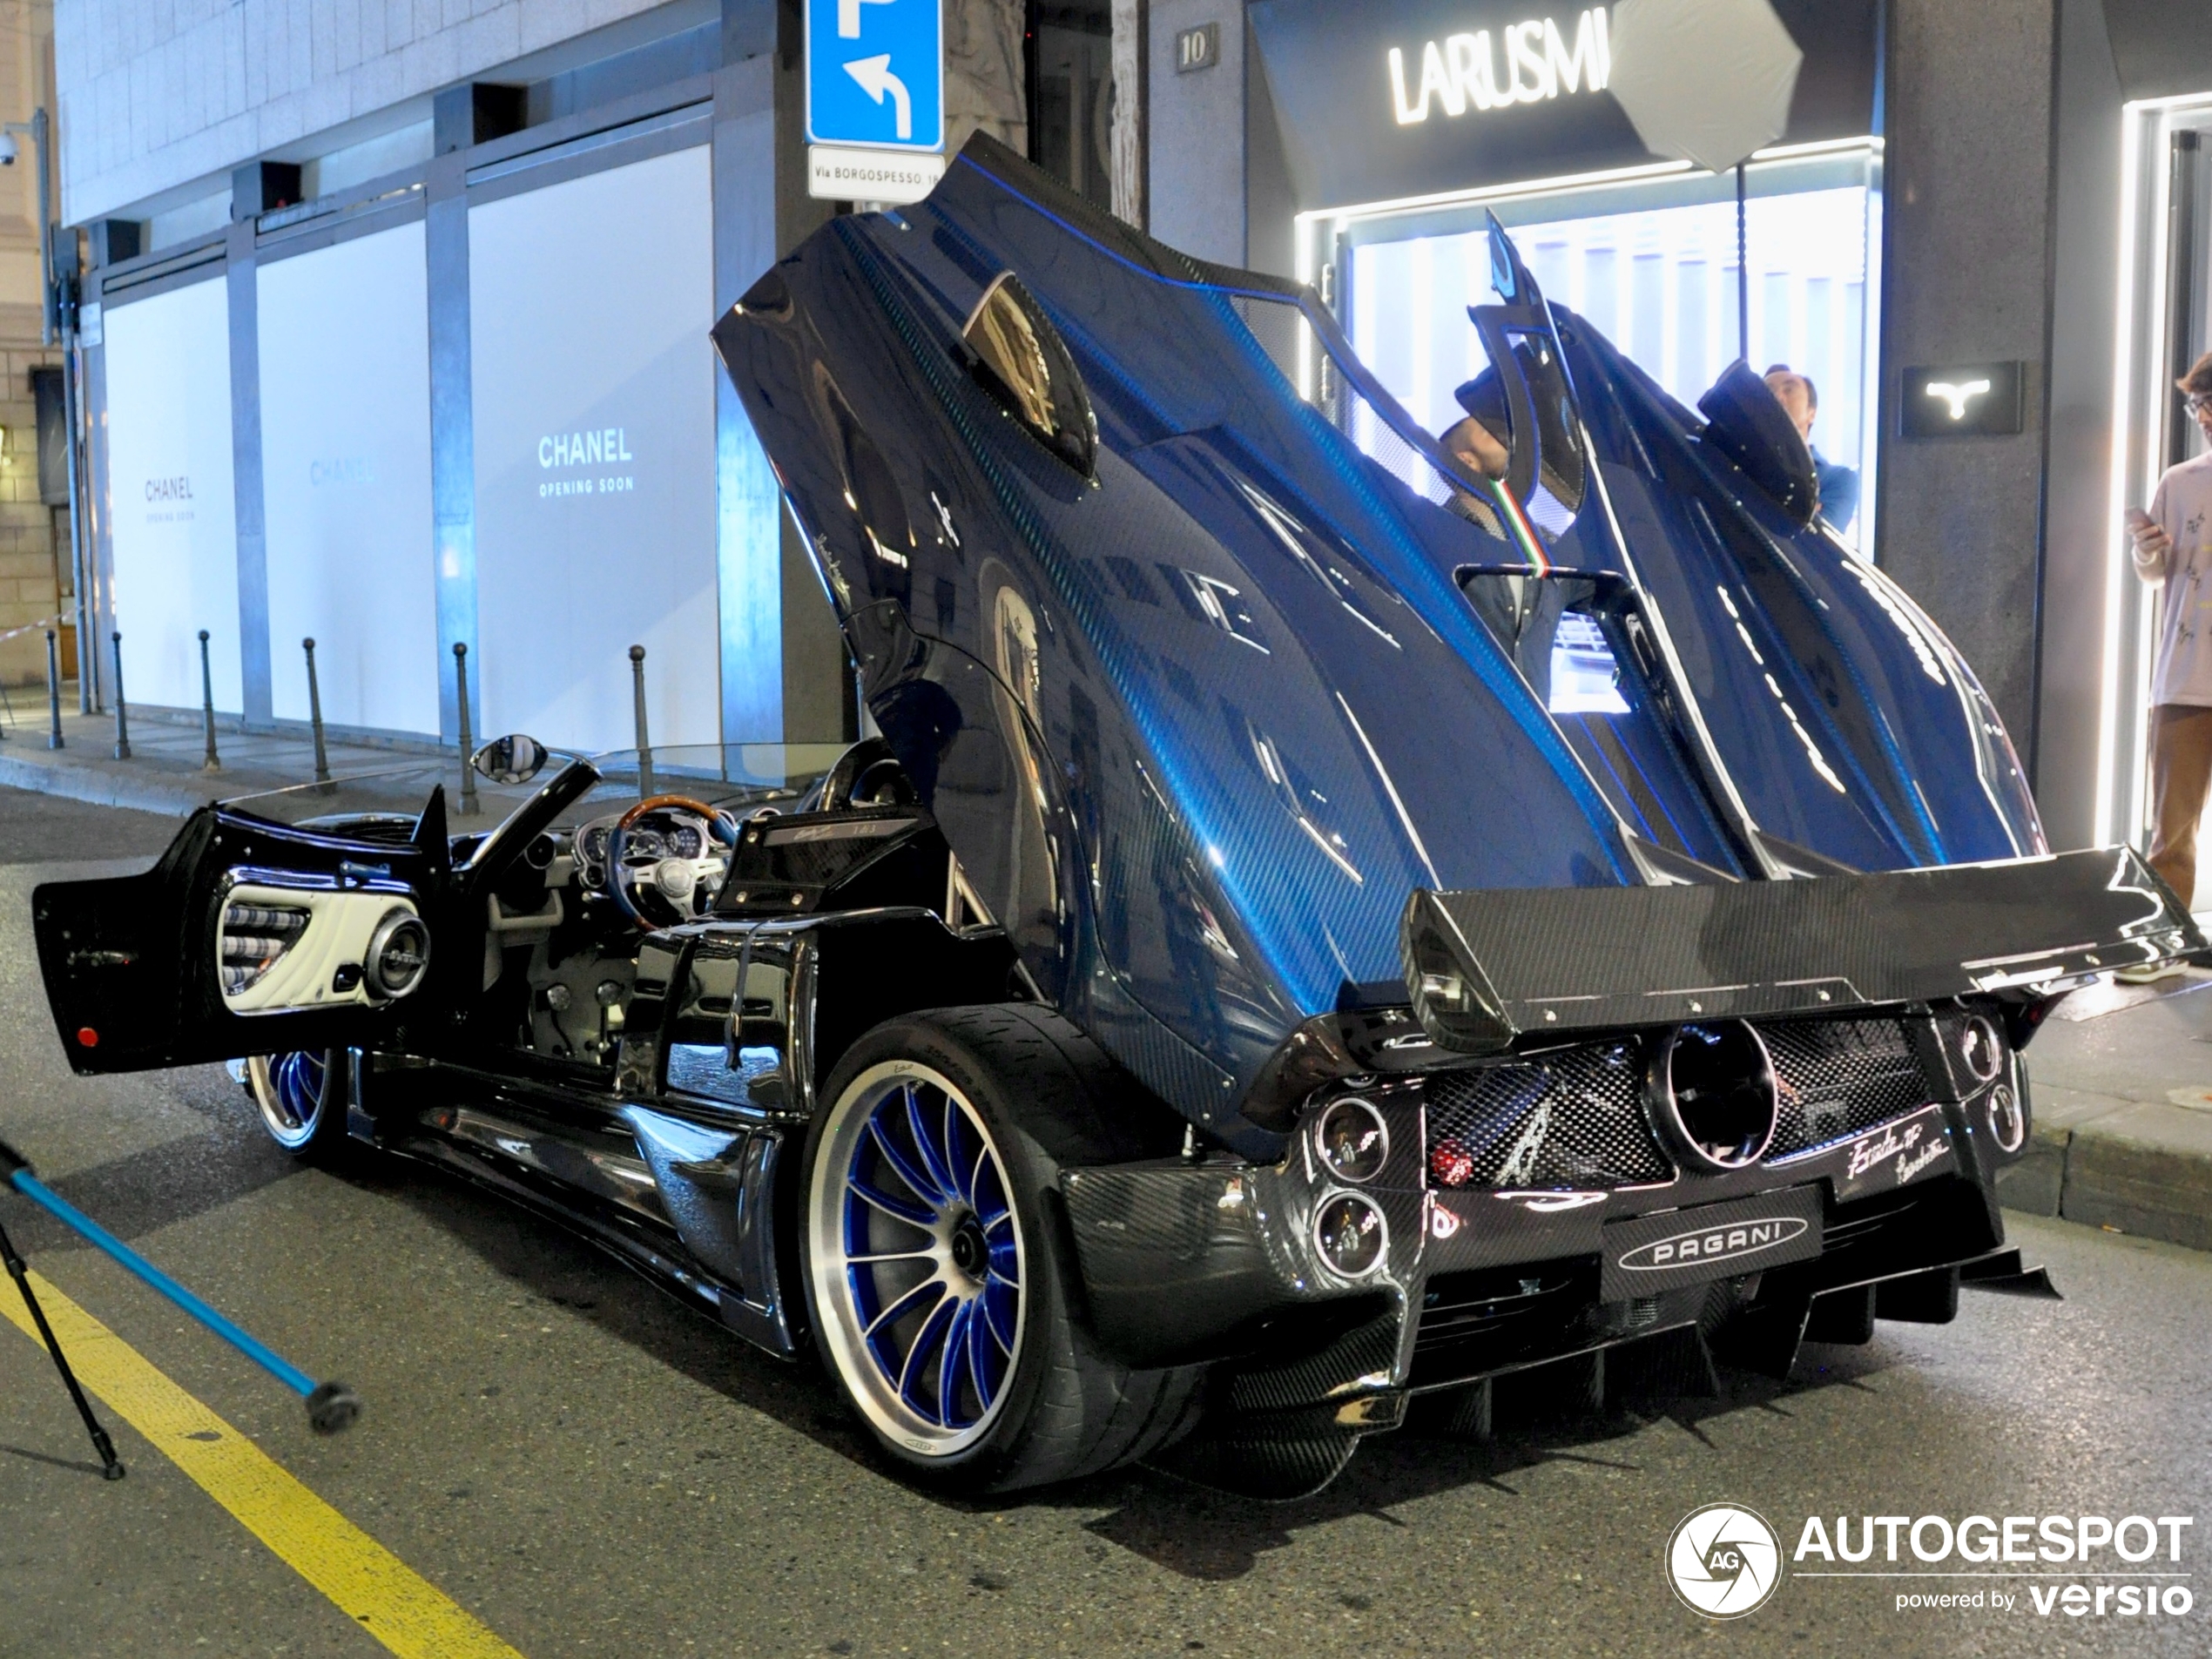 After five years, we finally see this Pagani Zonda HP Barchetta again.